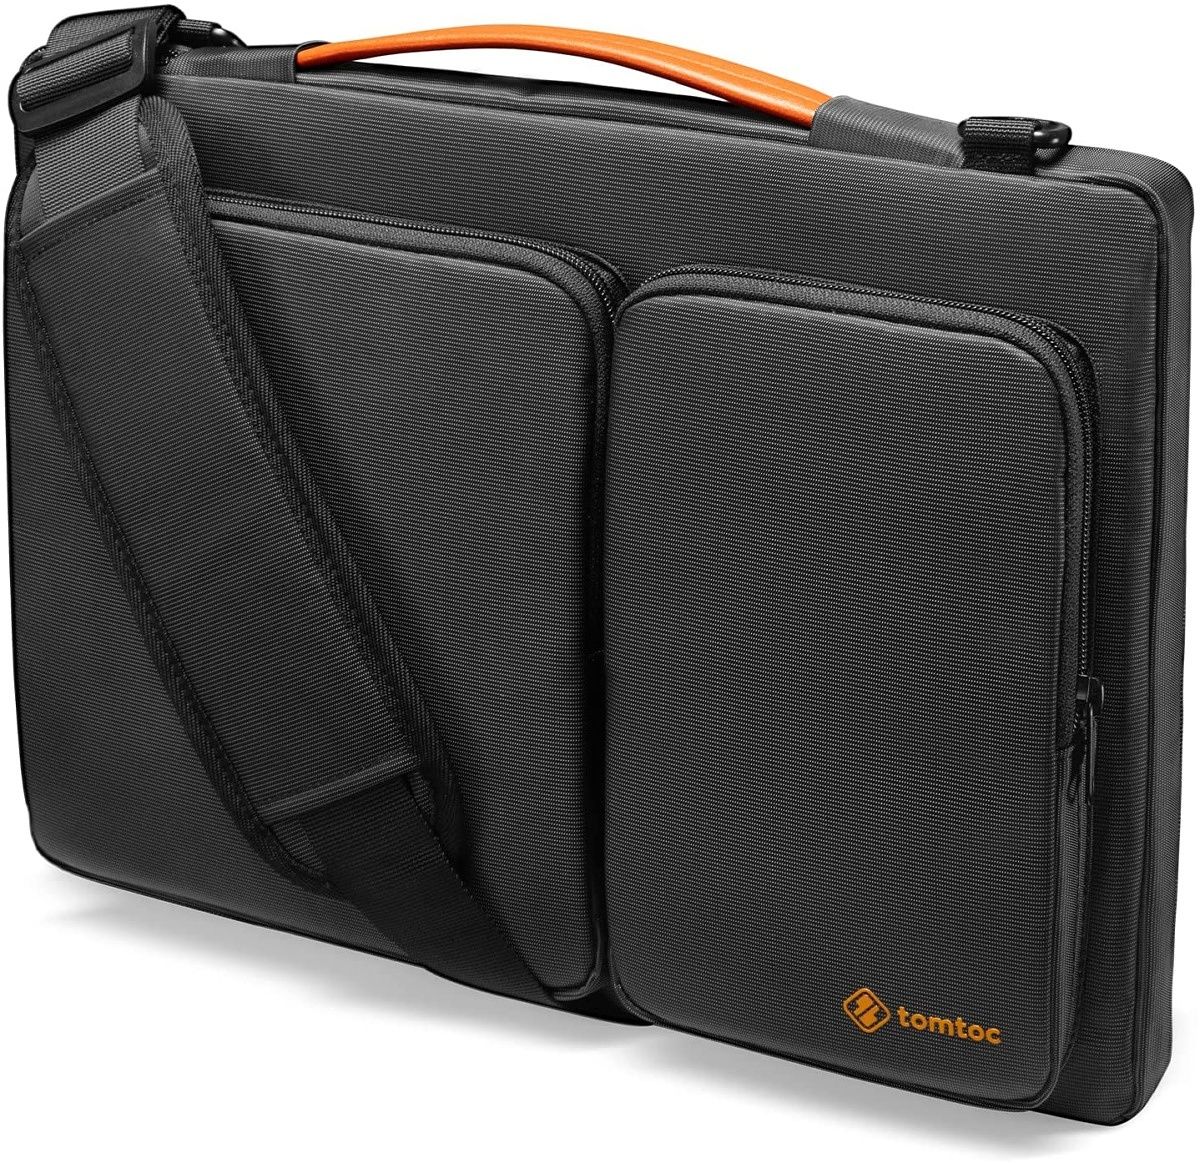 This tomtoc bag does a great job keeping your device safe with extra cushioning and reinforced corners, and it has extra storage pouches so you can carry all your accessories. Plus, you can carry it around with the shoulder strap.